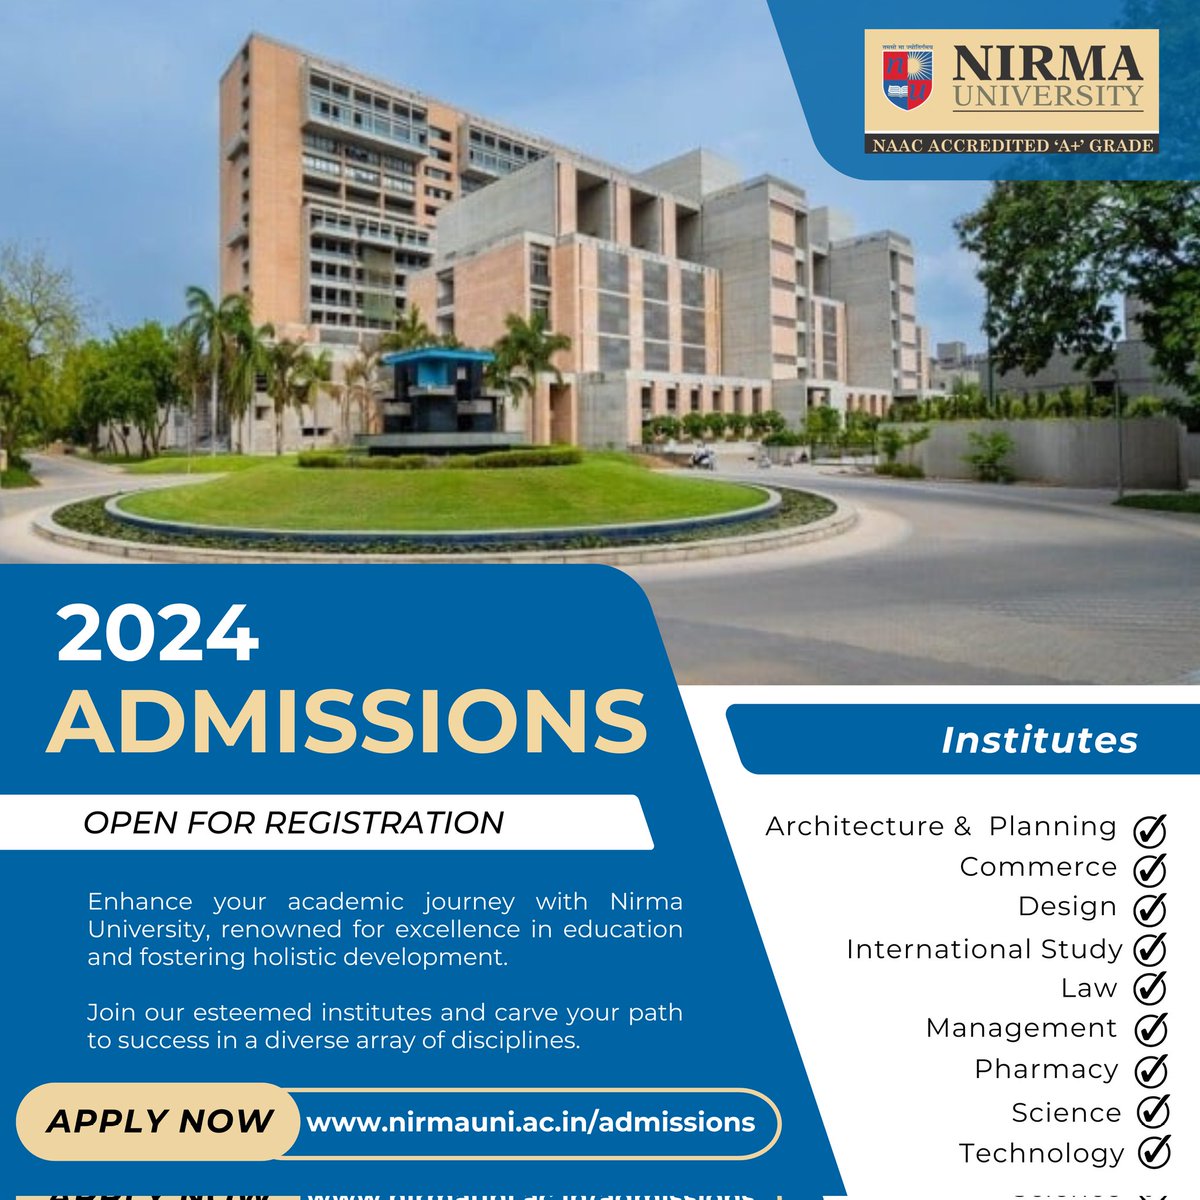 Admission 2024! Join Nirma University for academic excellence & holistic development. Apply now for Admission 2024 in diverse disciplines: Apply now: nirmauni.ac.in/admissions #NirmaUniversity #Admission2024 #HigherEducation #ApplyNow #Admission #Apply #Registration #Education